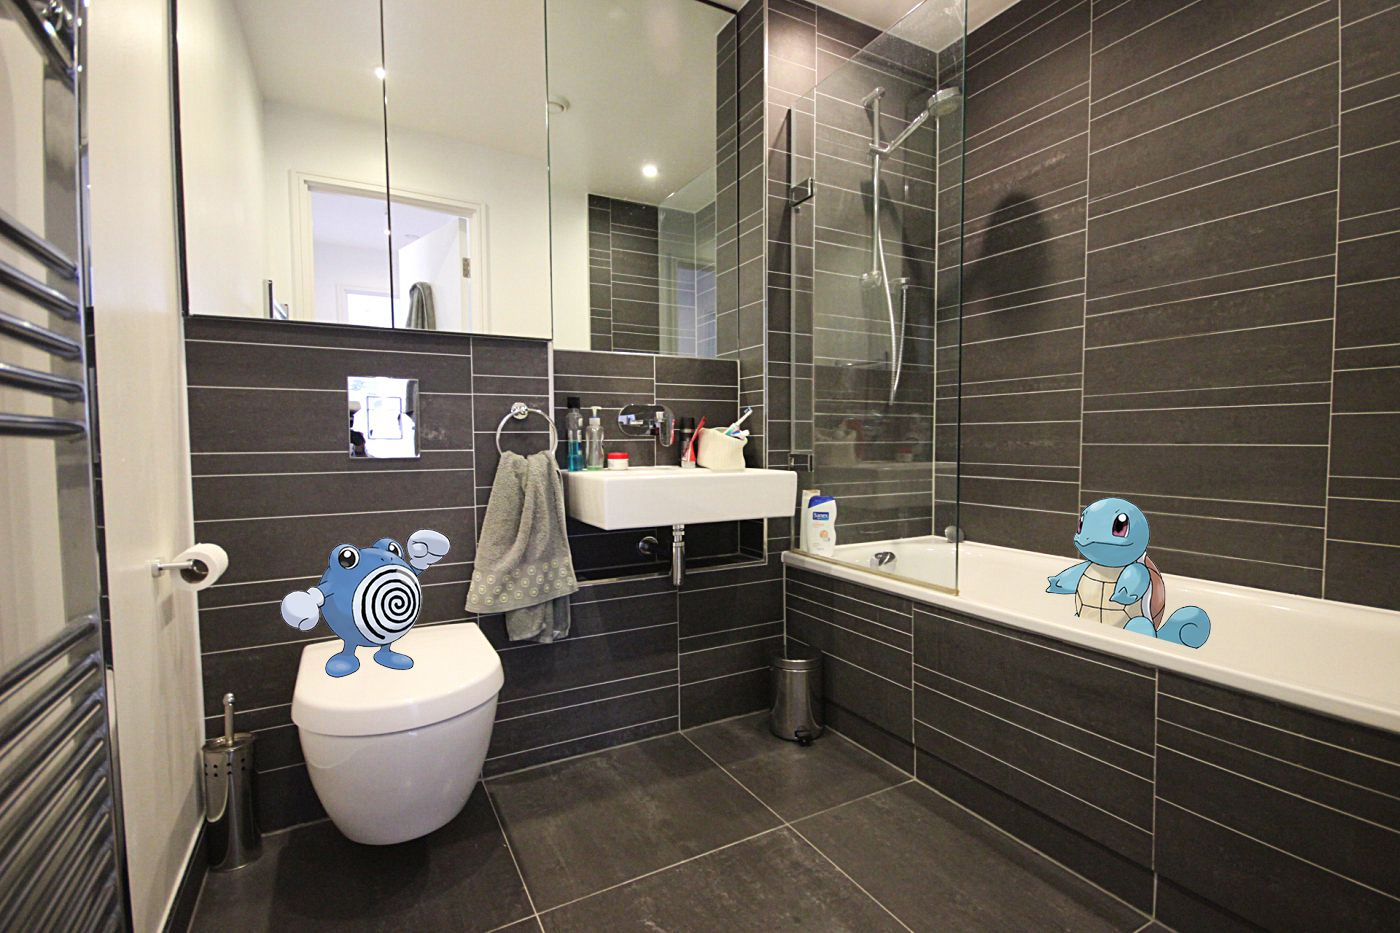 Squirtle was always a big fan of bath time